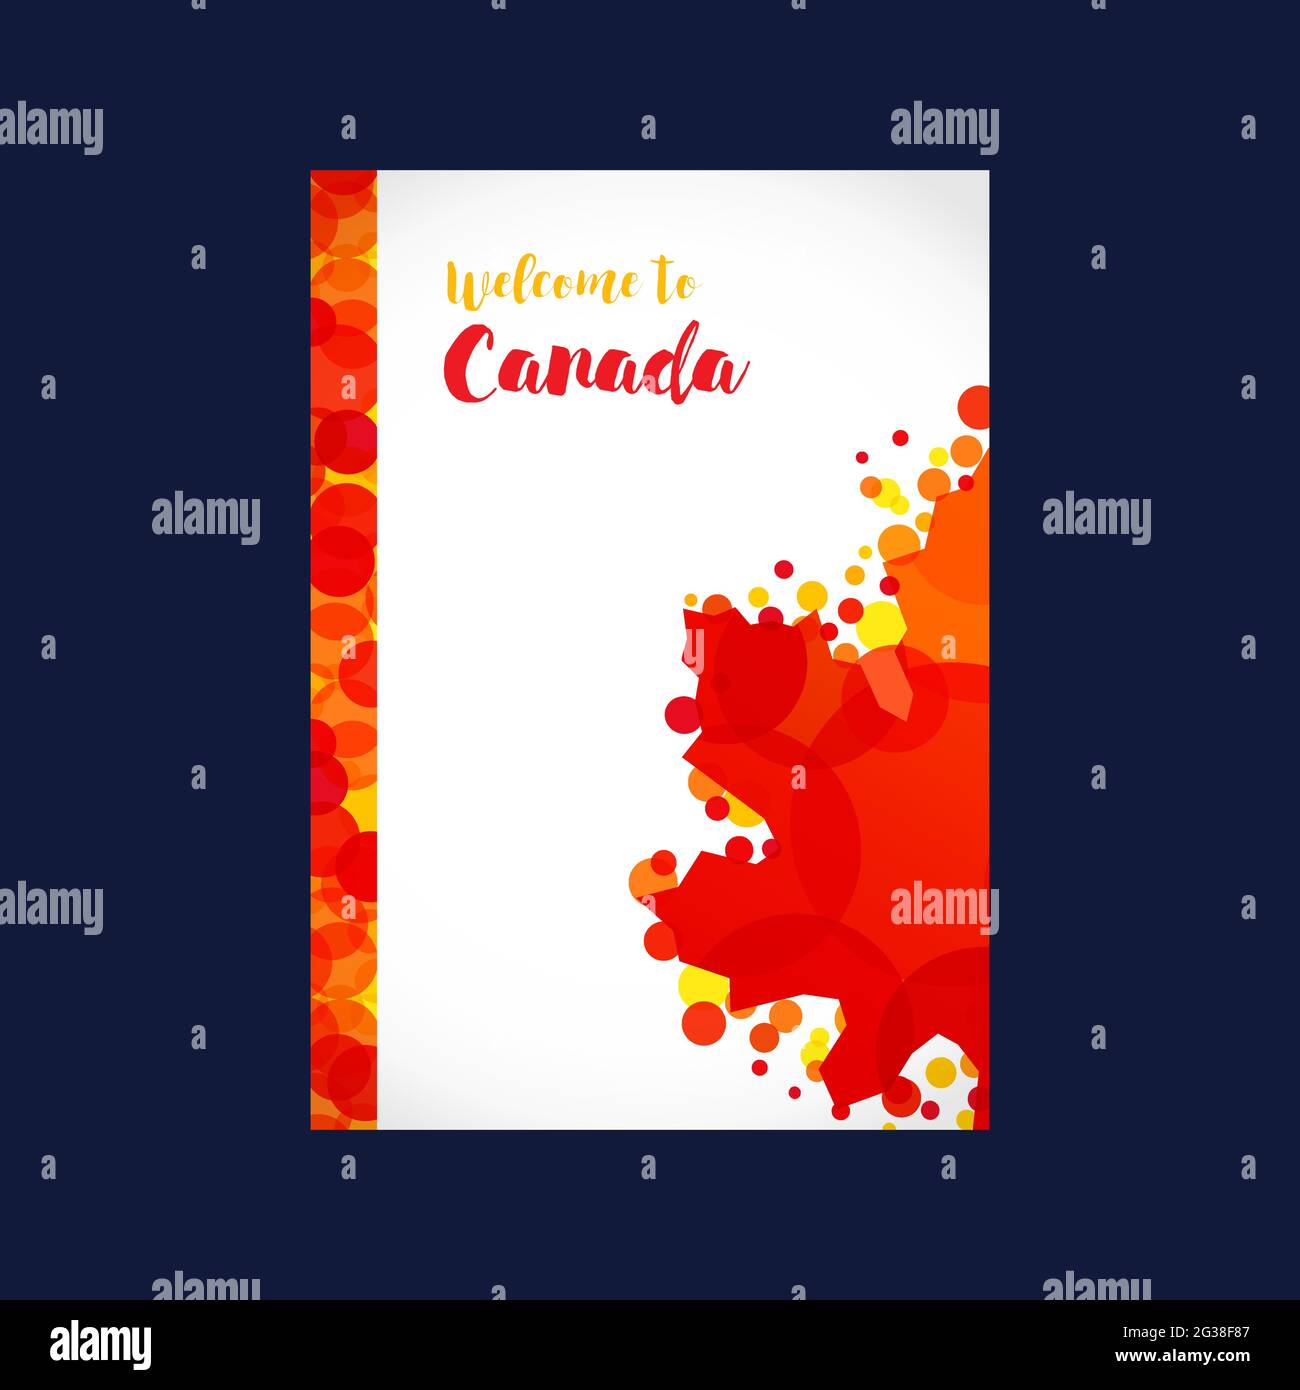 Welcome to Canada A4 folder concept. Isolated abstract graphic design template. Creative cover. Calligraphic lettering. Decorative brush calligraphy, Stock Vector